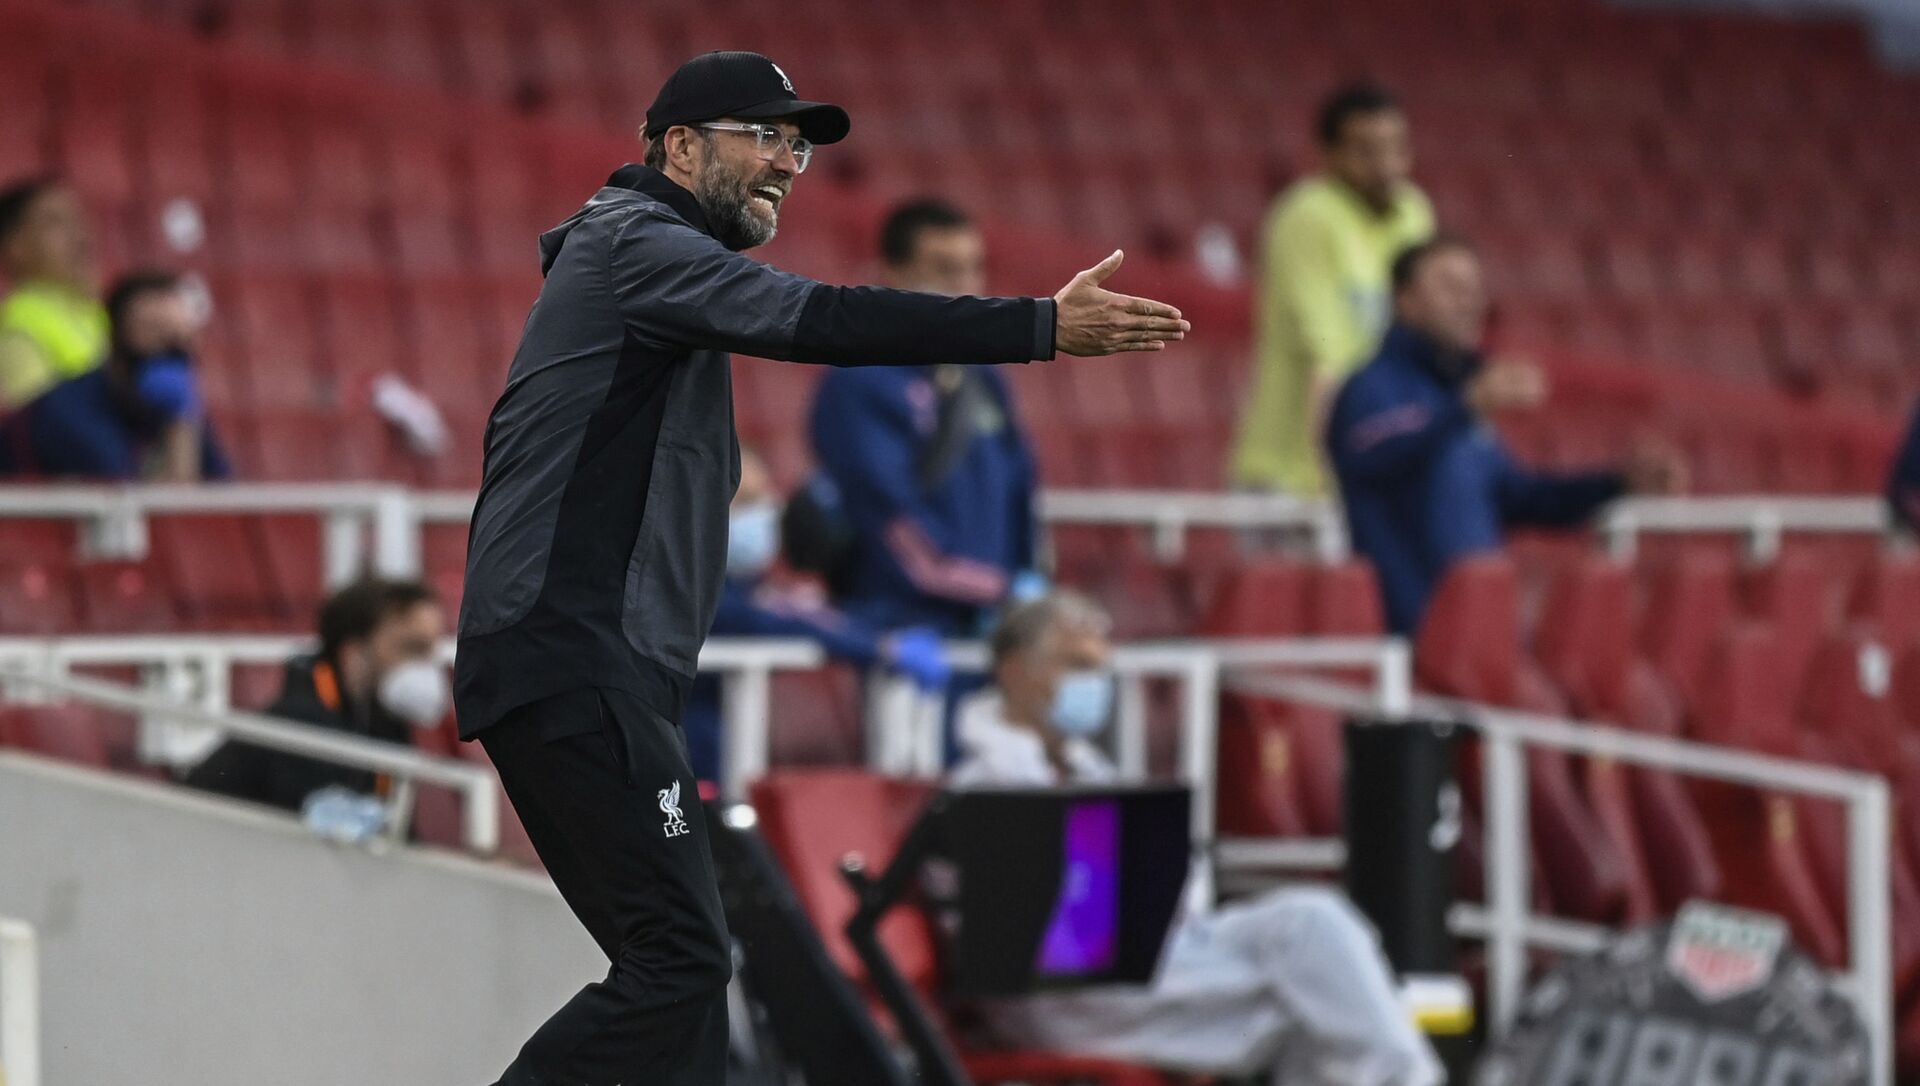 Liverpool's manager Jurgen Klopp gestures during the English Premier League soccer match between Arsenal and Liverpool at the Emirates Stadium in London, England, Wednesday, July 15, 2020. - Sputnik International, 1920, 20.02.2021